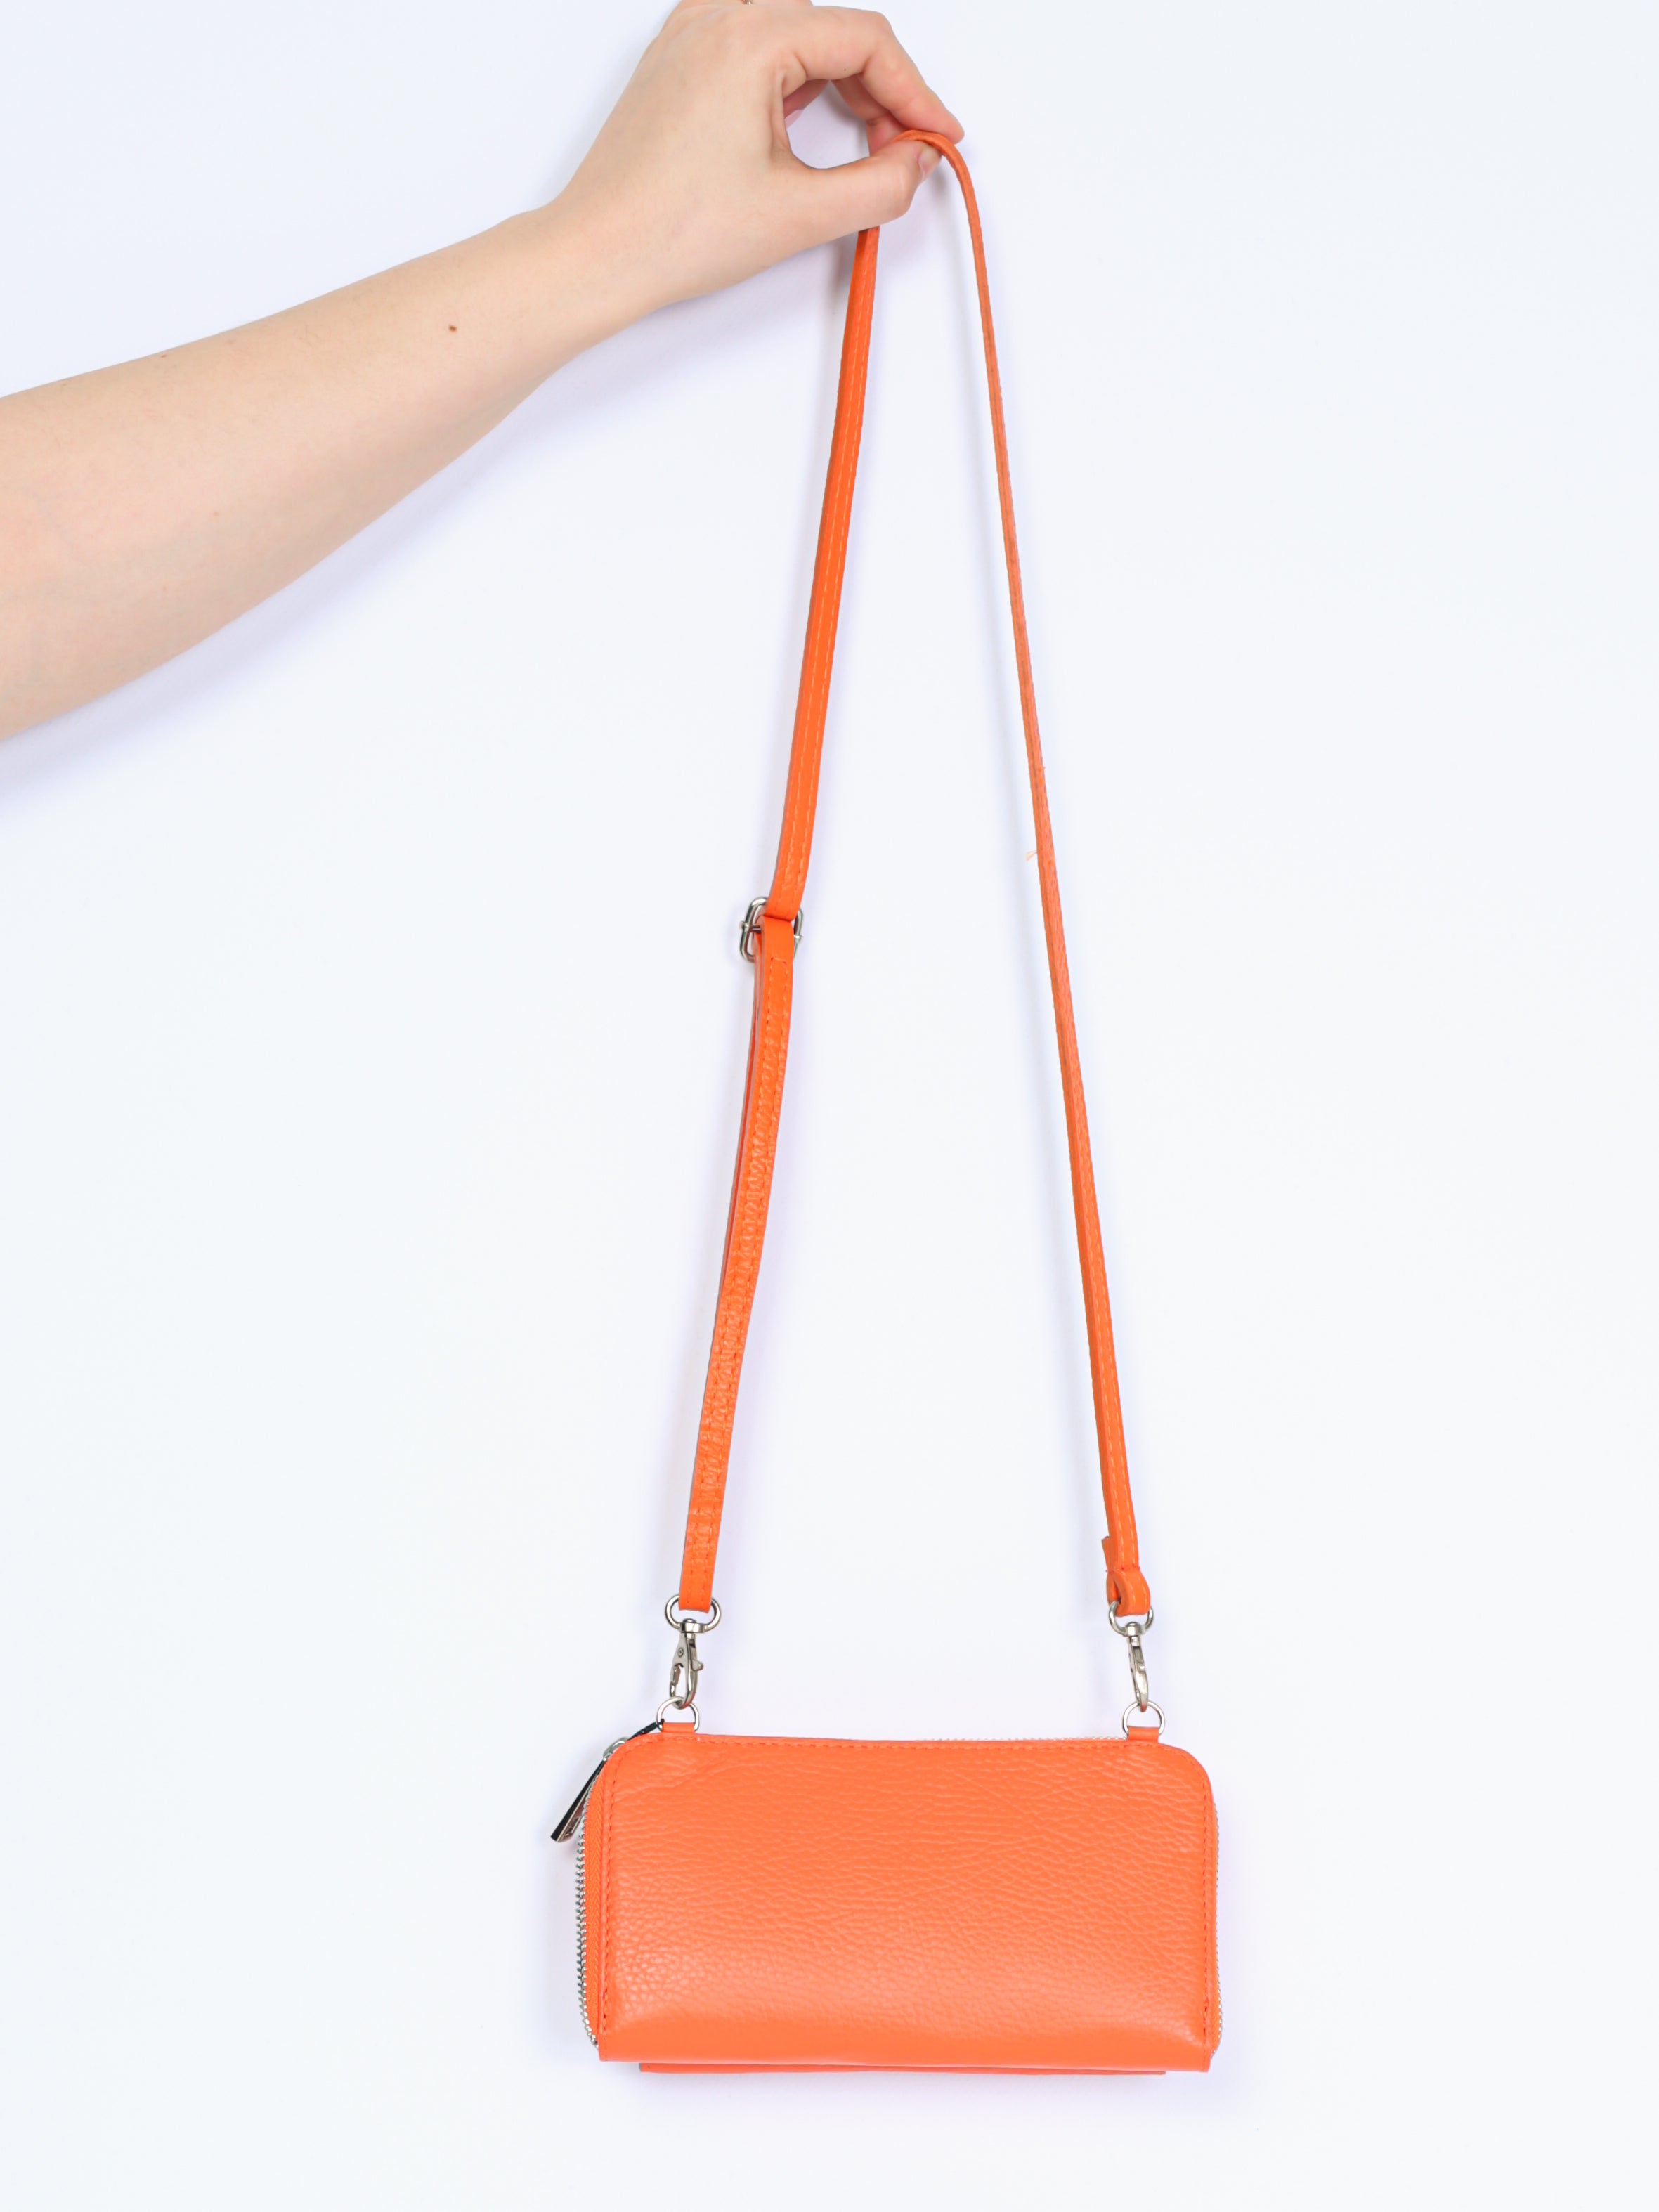 Purse with strap